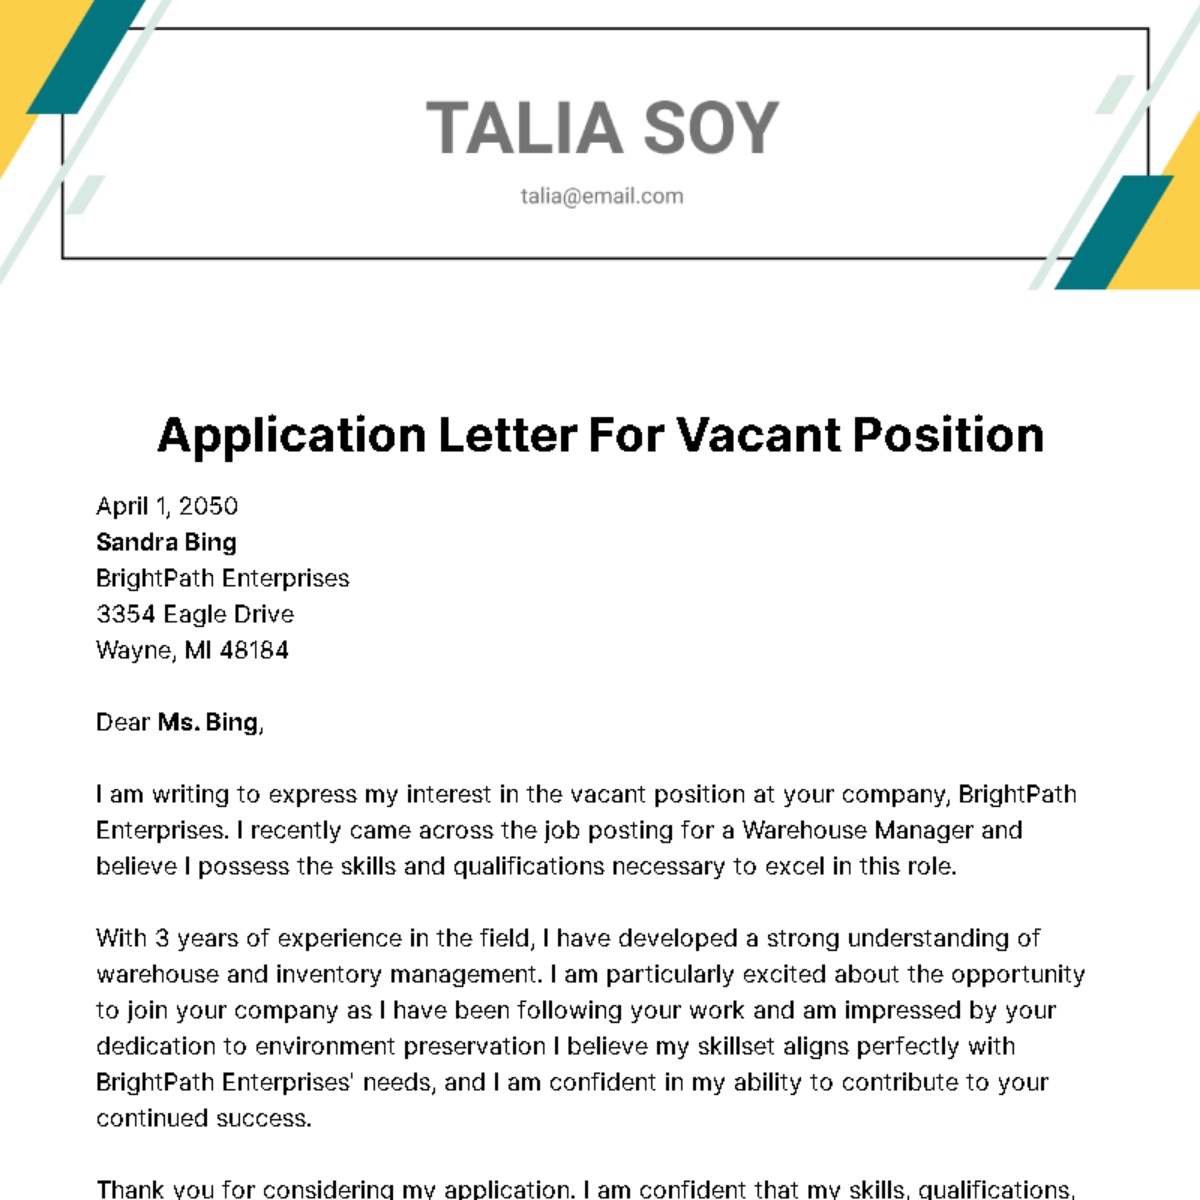 Application Letter for Vacant Position Template